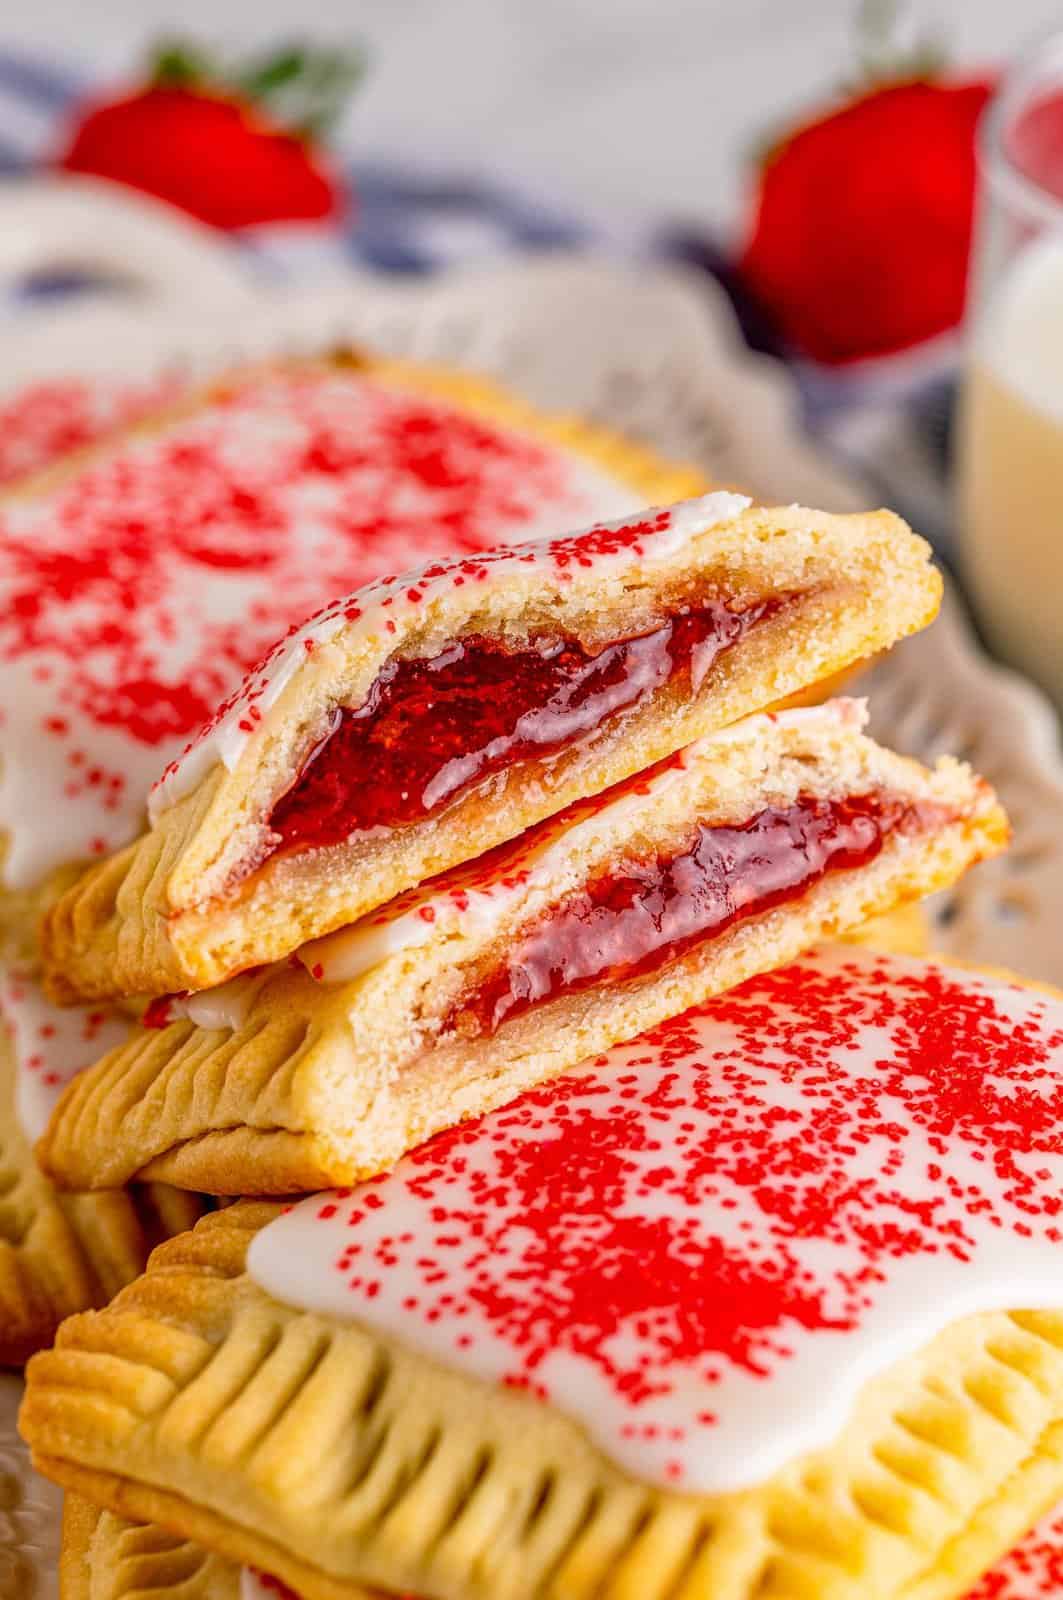 One Strawberry Pop-Tart cut in half showing center filling.